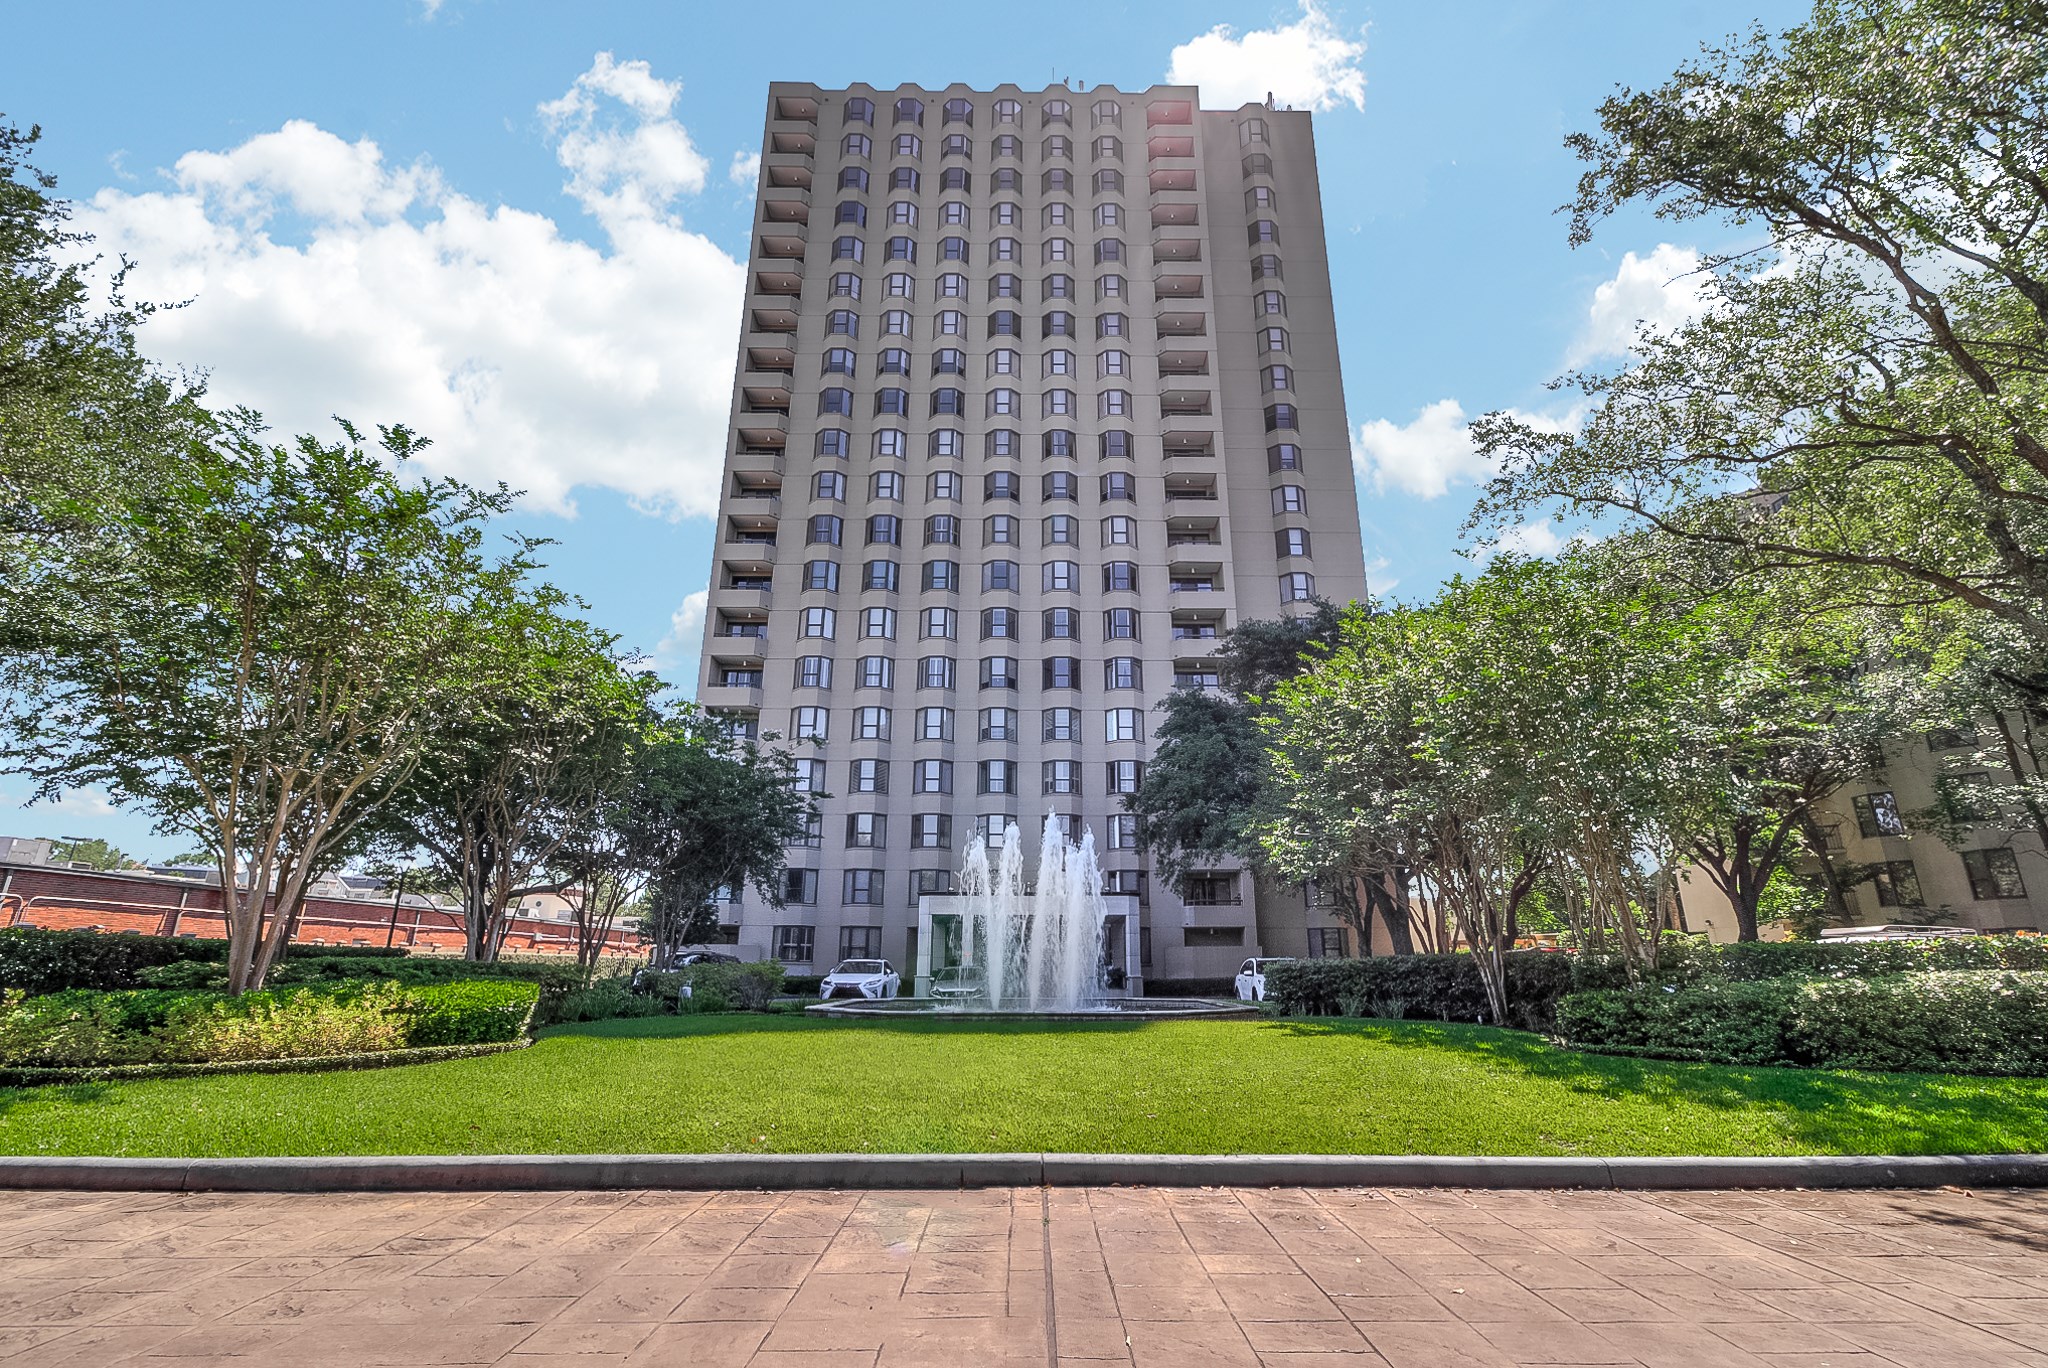 Welcome home to your condo in this beautiful 20 story Hi-Rise, in the heart of Tanglewood!